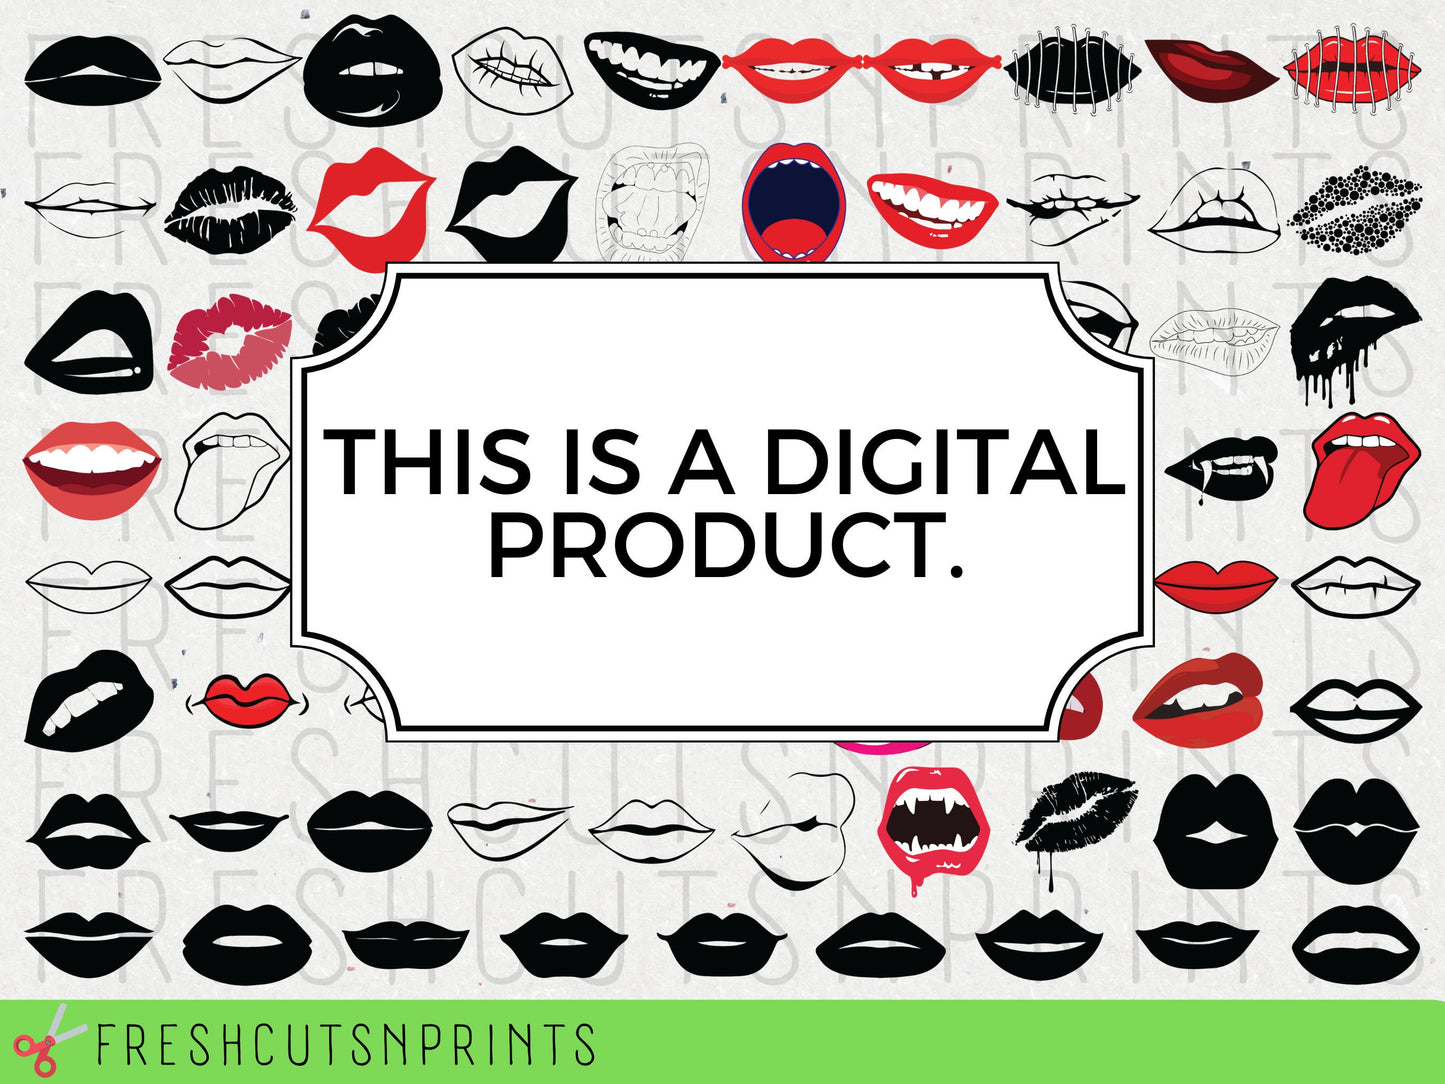 70+ Lips SVG Bundle , Lips Clipart, Lips Cut File, Lips Silhouette, Mouth svg, Lips Vector, Dripping Lips SVG, Kiss svg, Commercial use